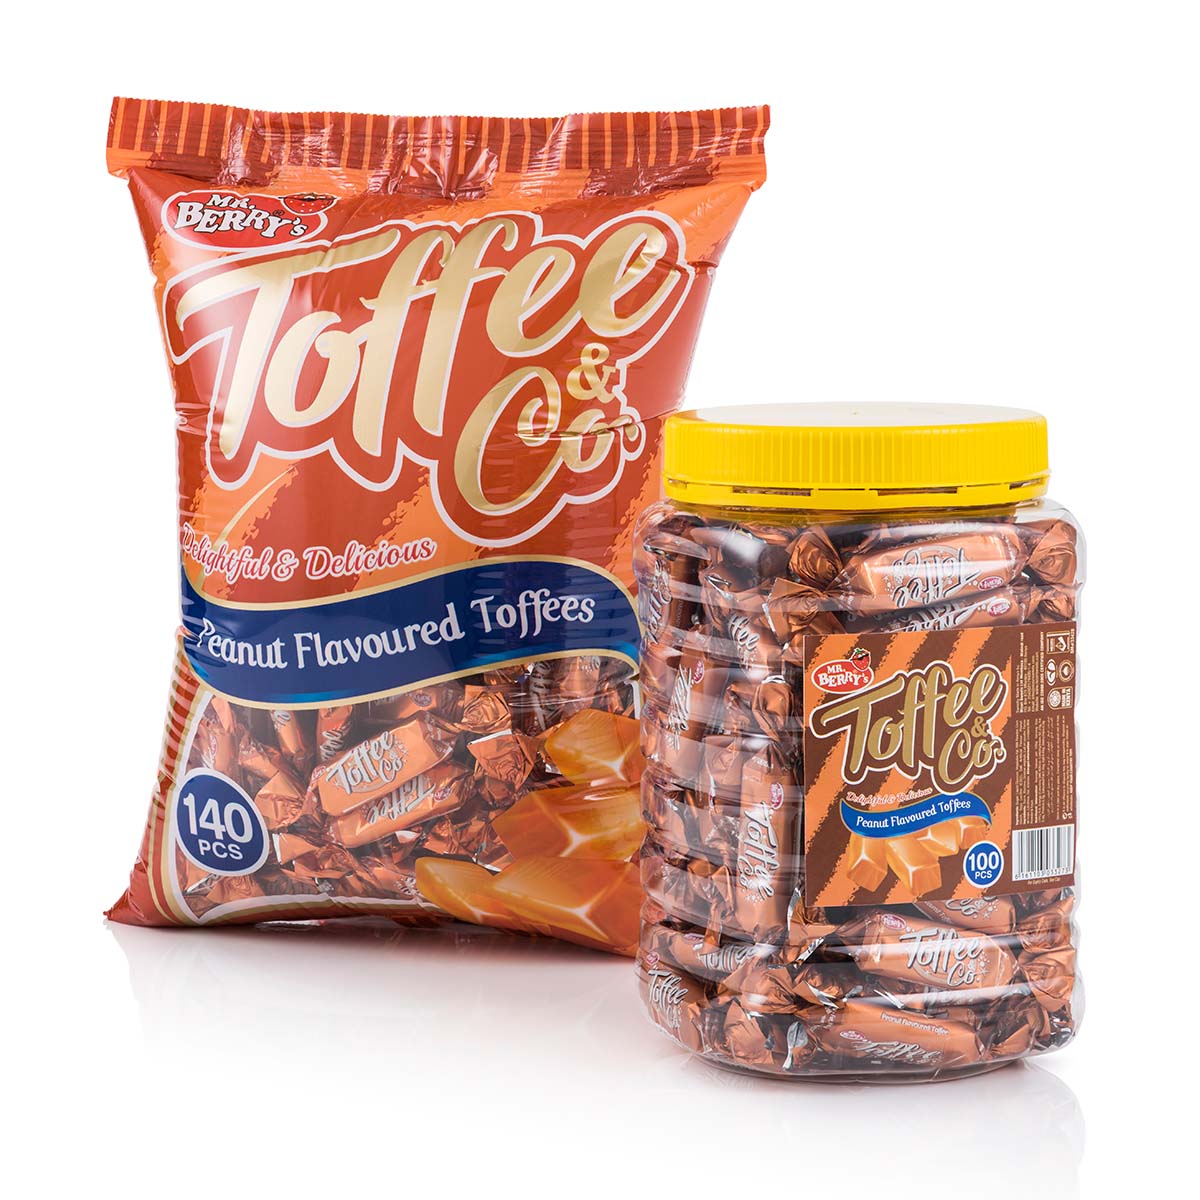 TOFFEE & CO. Peanut Flavour (140 Pieces) x 12